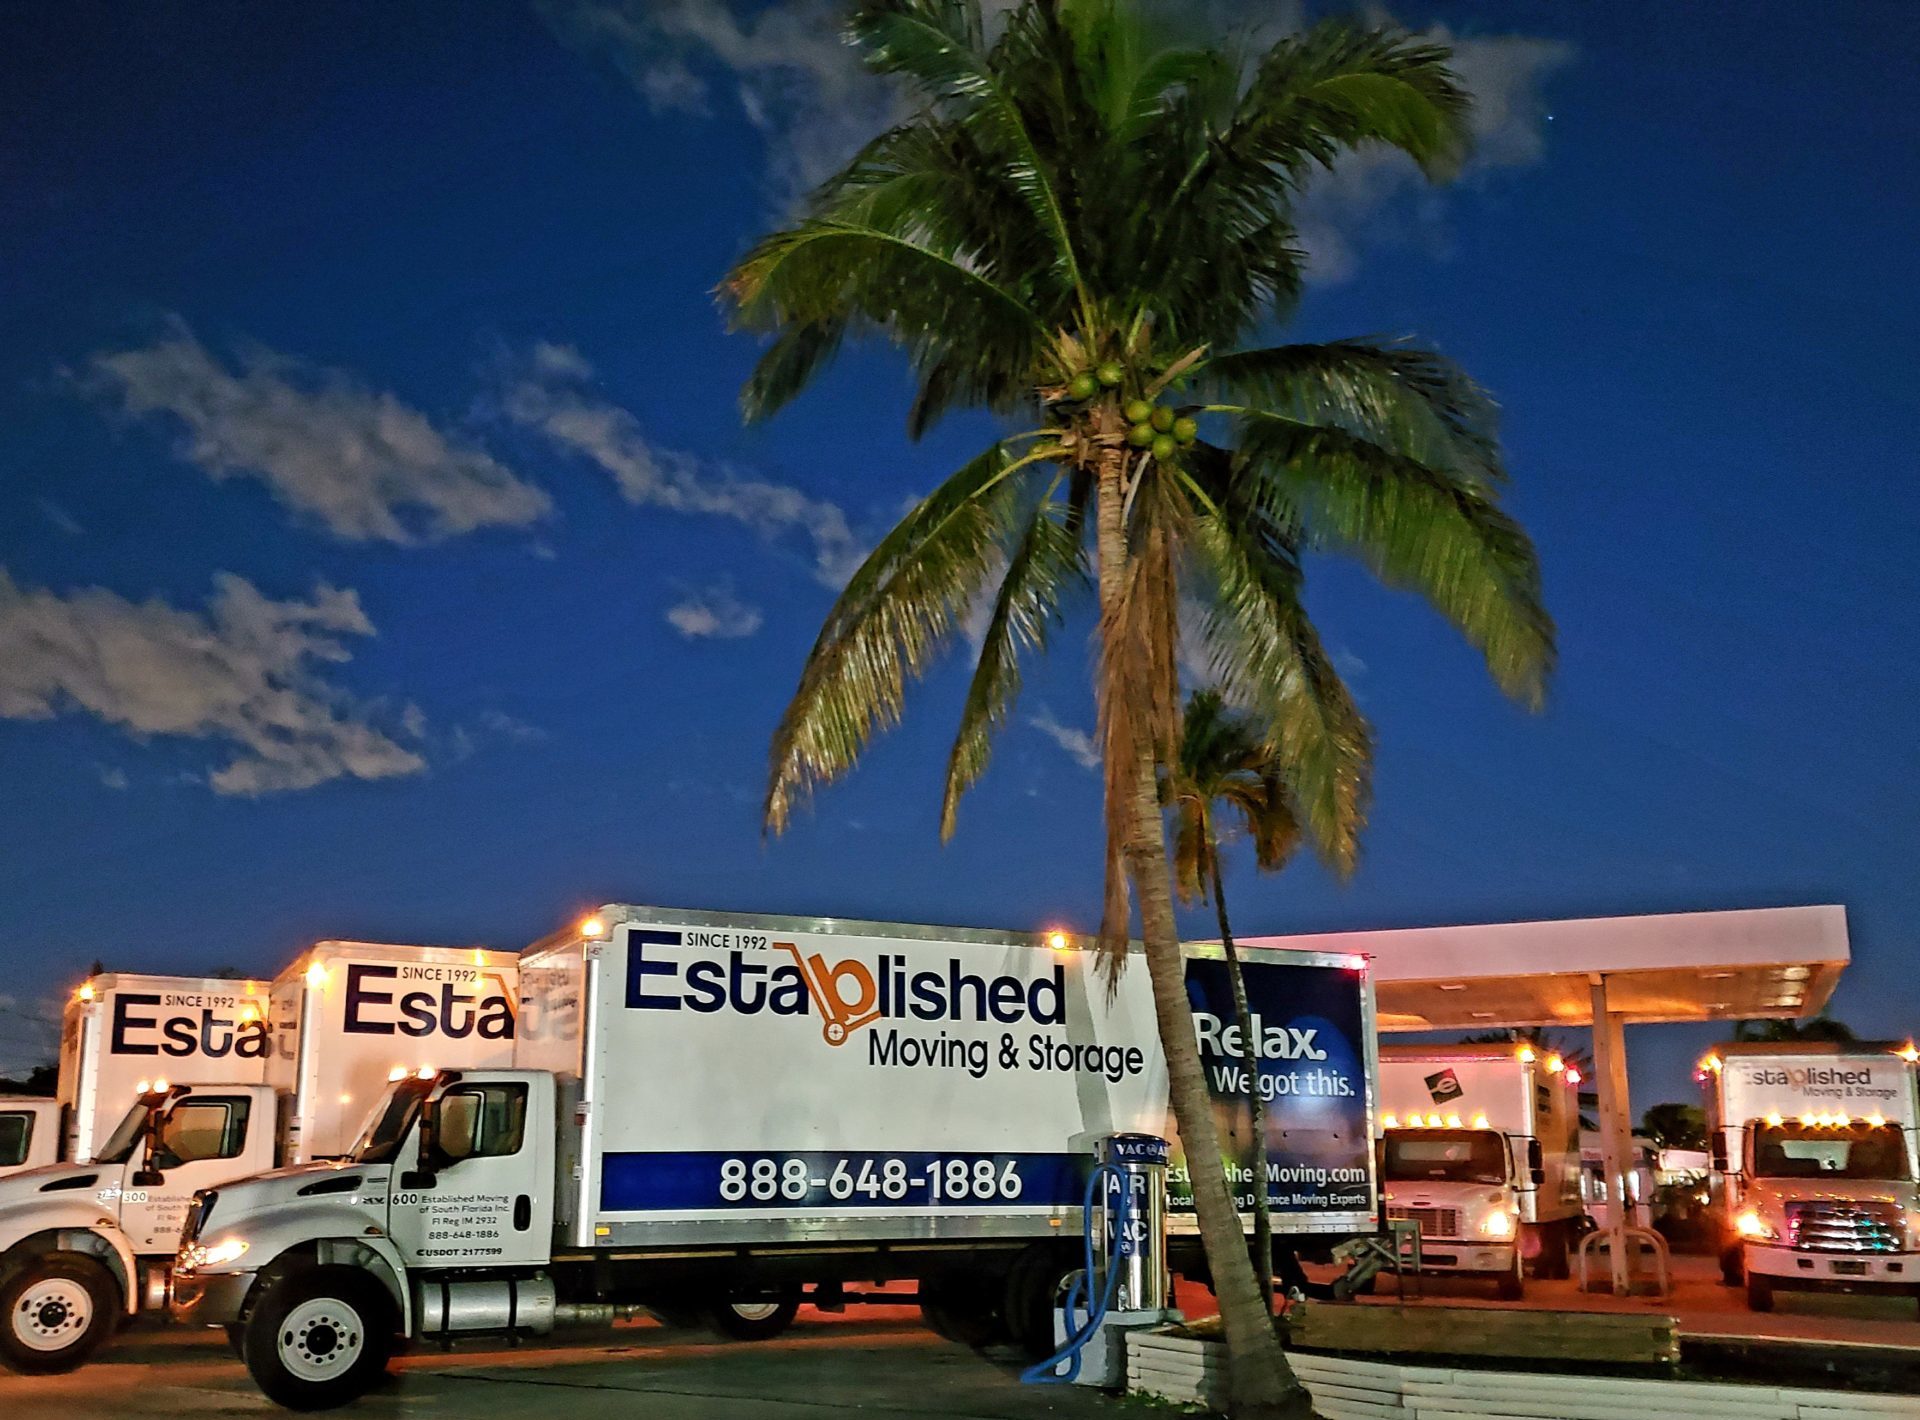 Established Moving & storage trucks get ready to go move in Jacksonville